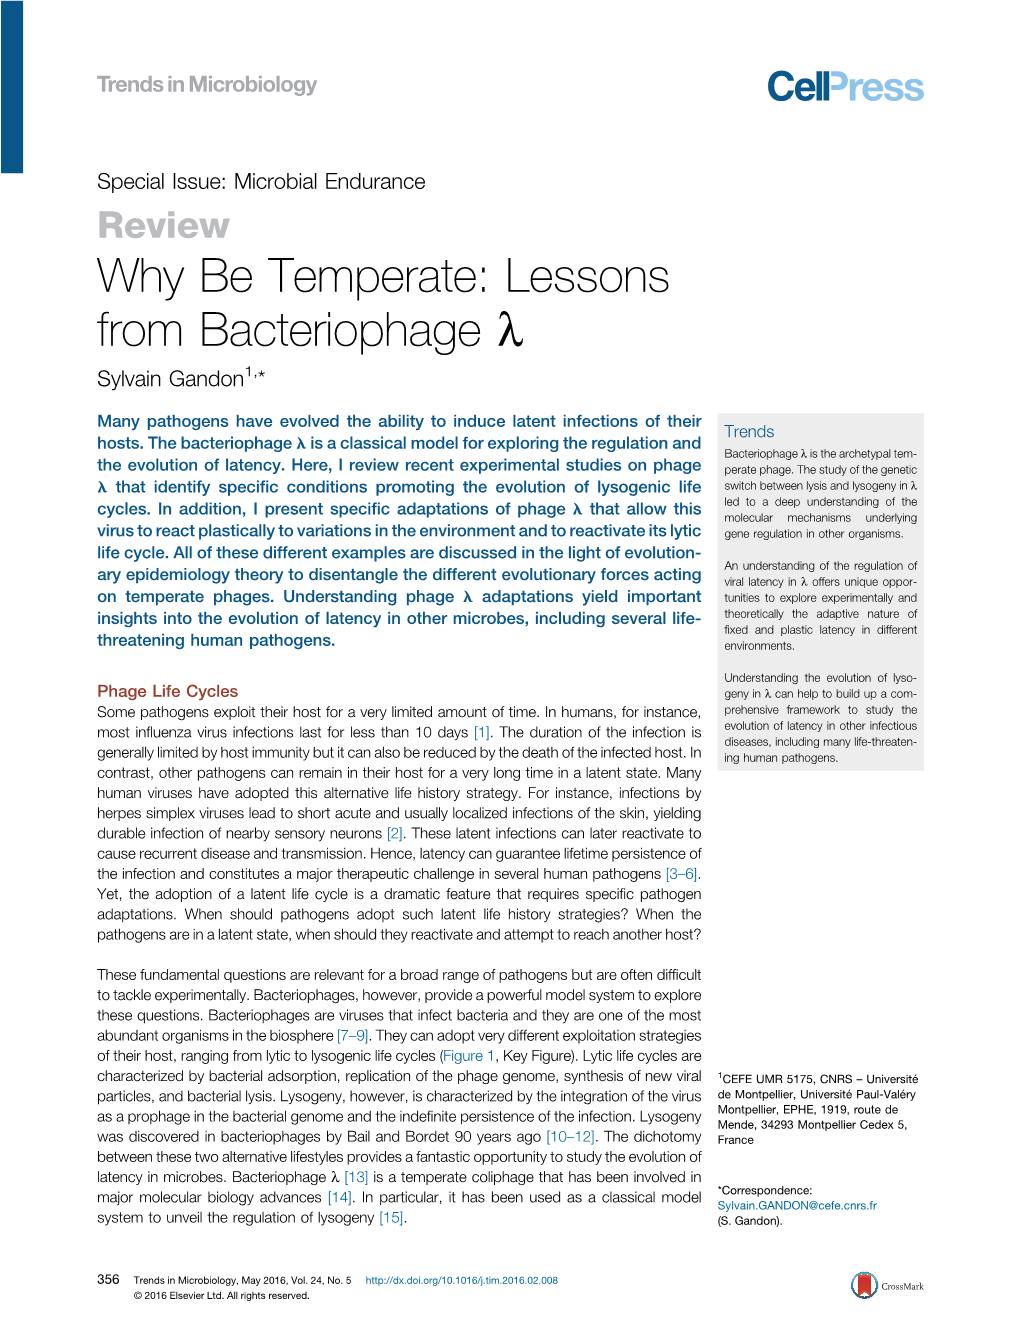 Why Be Temperate: Lessons from Bacteriophage Lambda